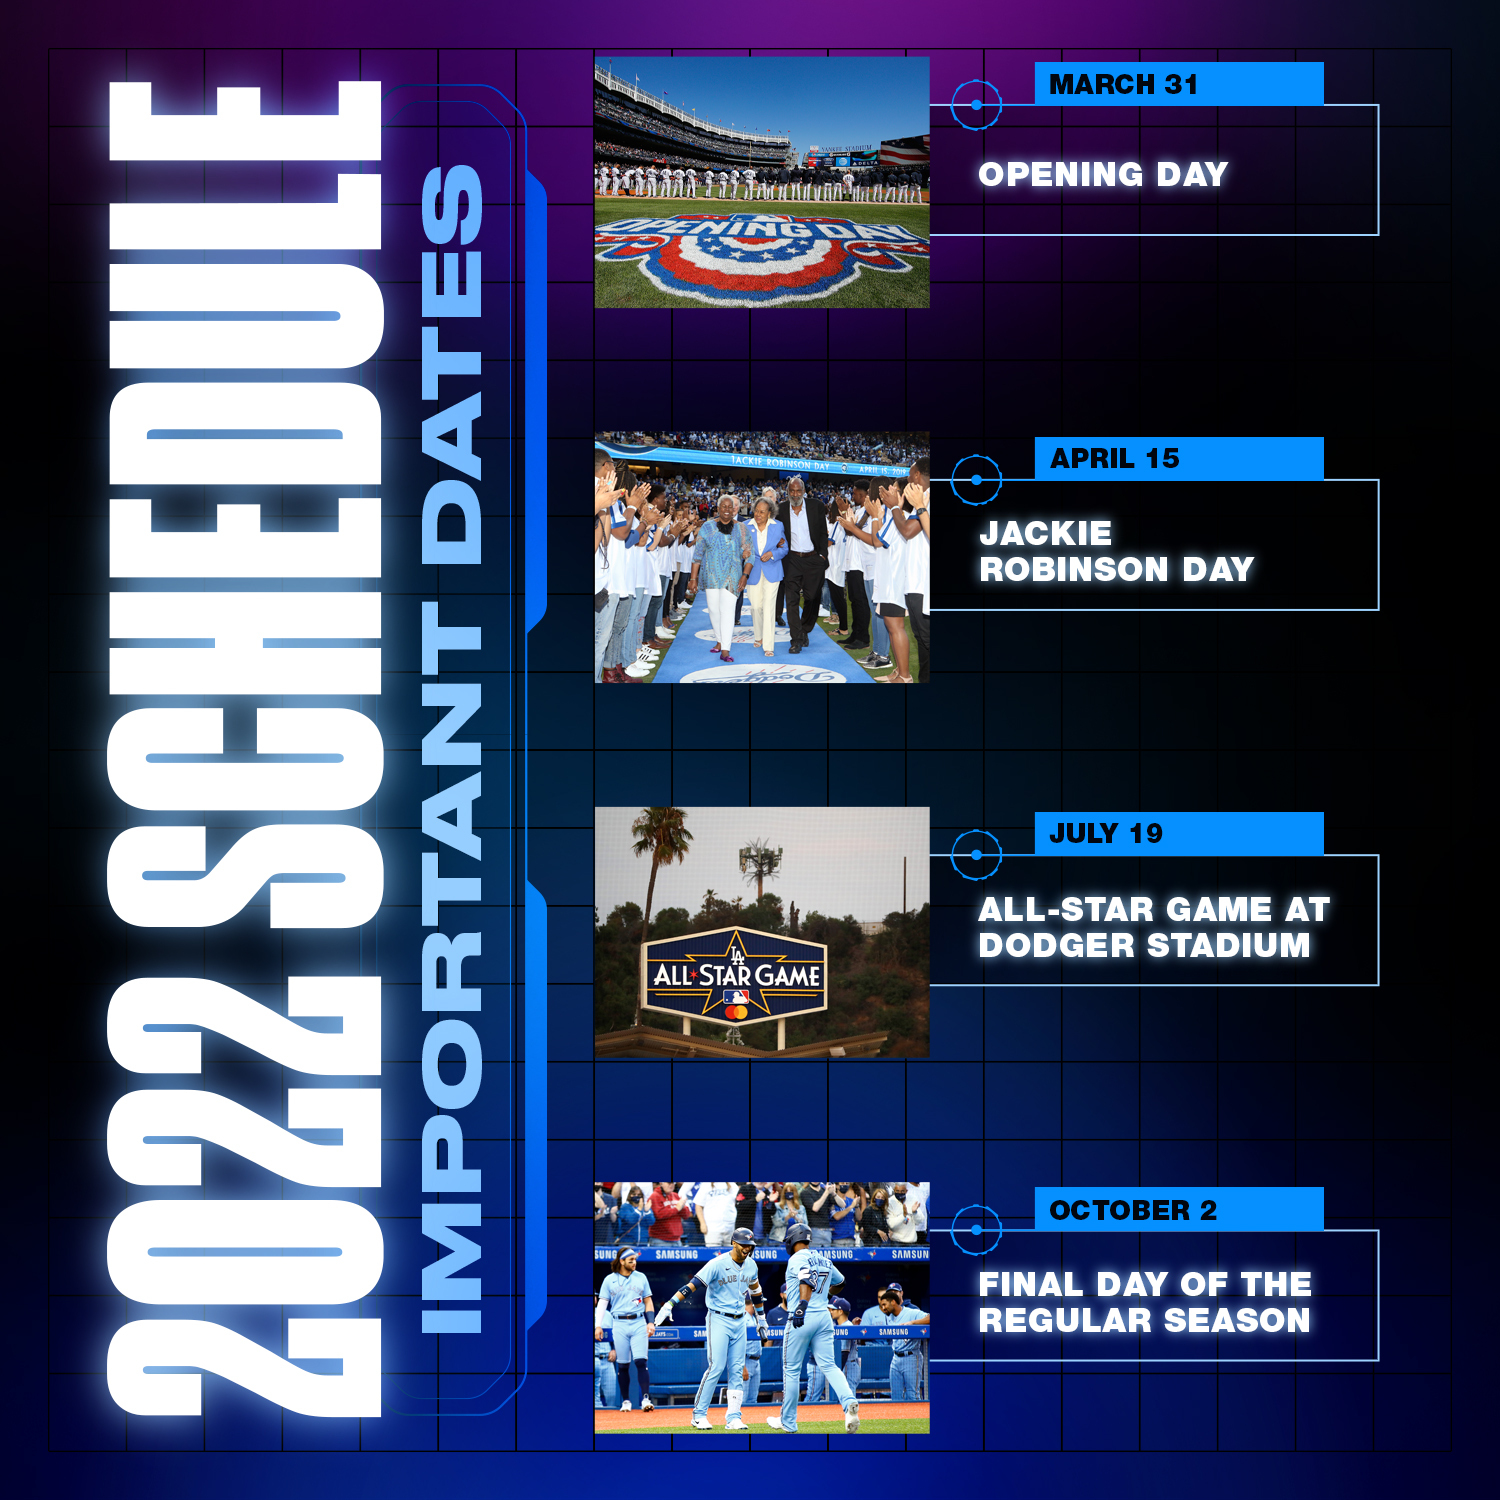 Mlb Schedule September 2022 Mlb On Twitter: "The 2022 Schedule Is Out! Mark Your Calendar Accordingly.  ⬇️ Https://T.co/By19Zgwwbu" / Twitter